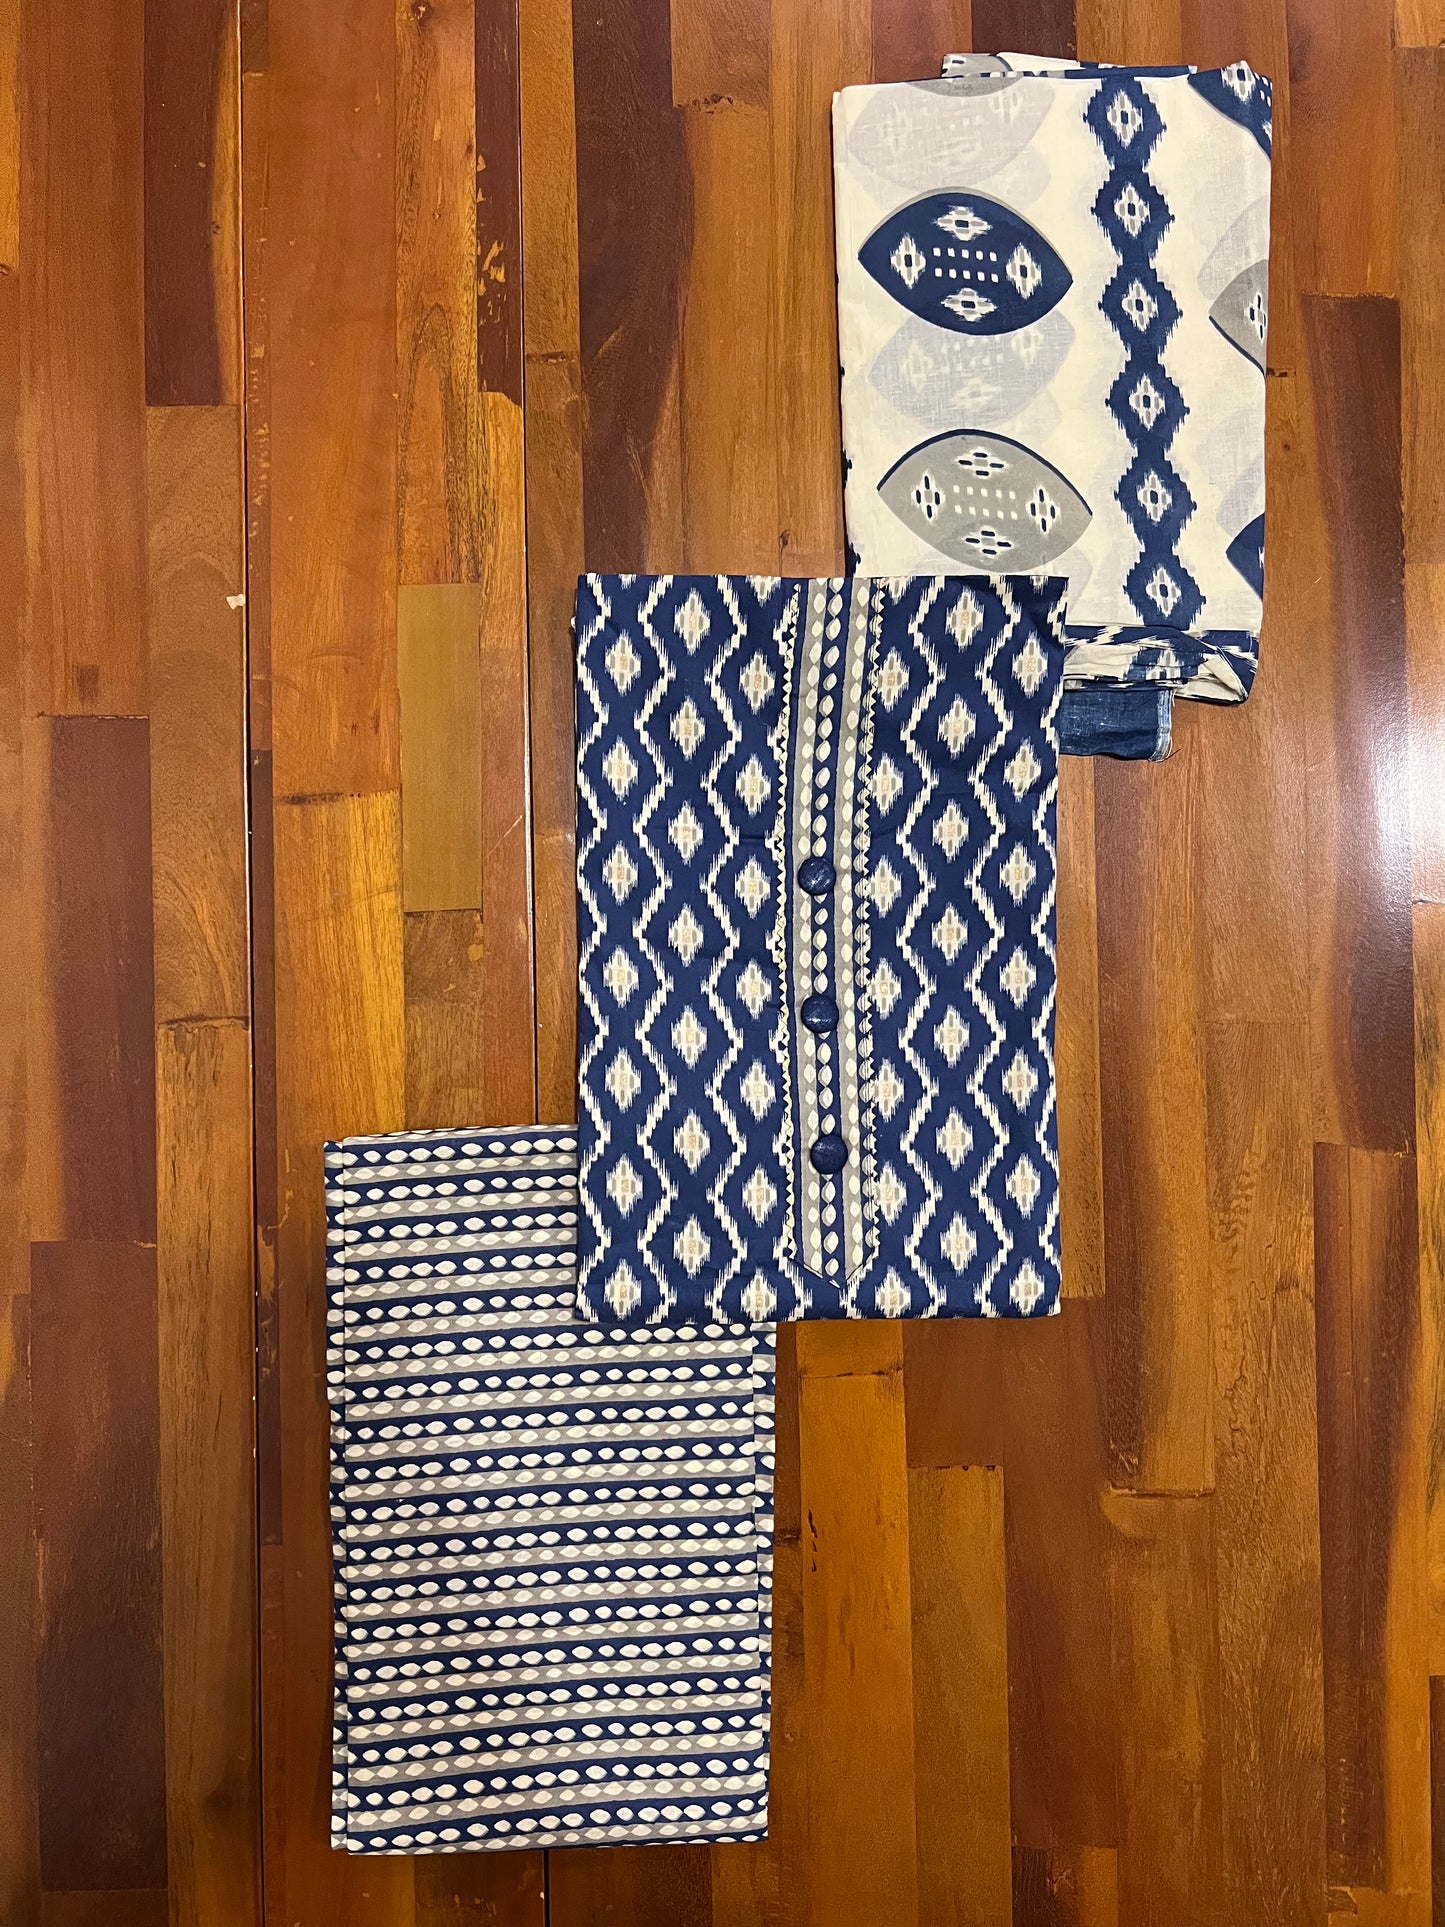 Southloom™ Cotton Churidar Salwar Suit Material in Blue and White Zig Zag Prints